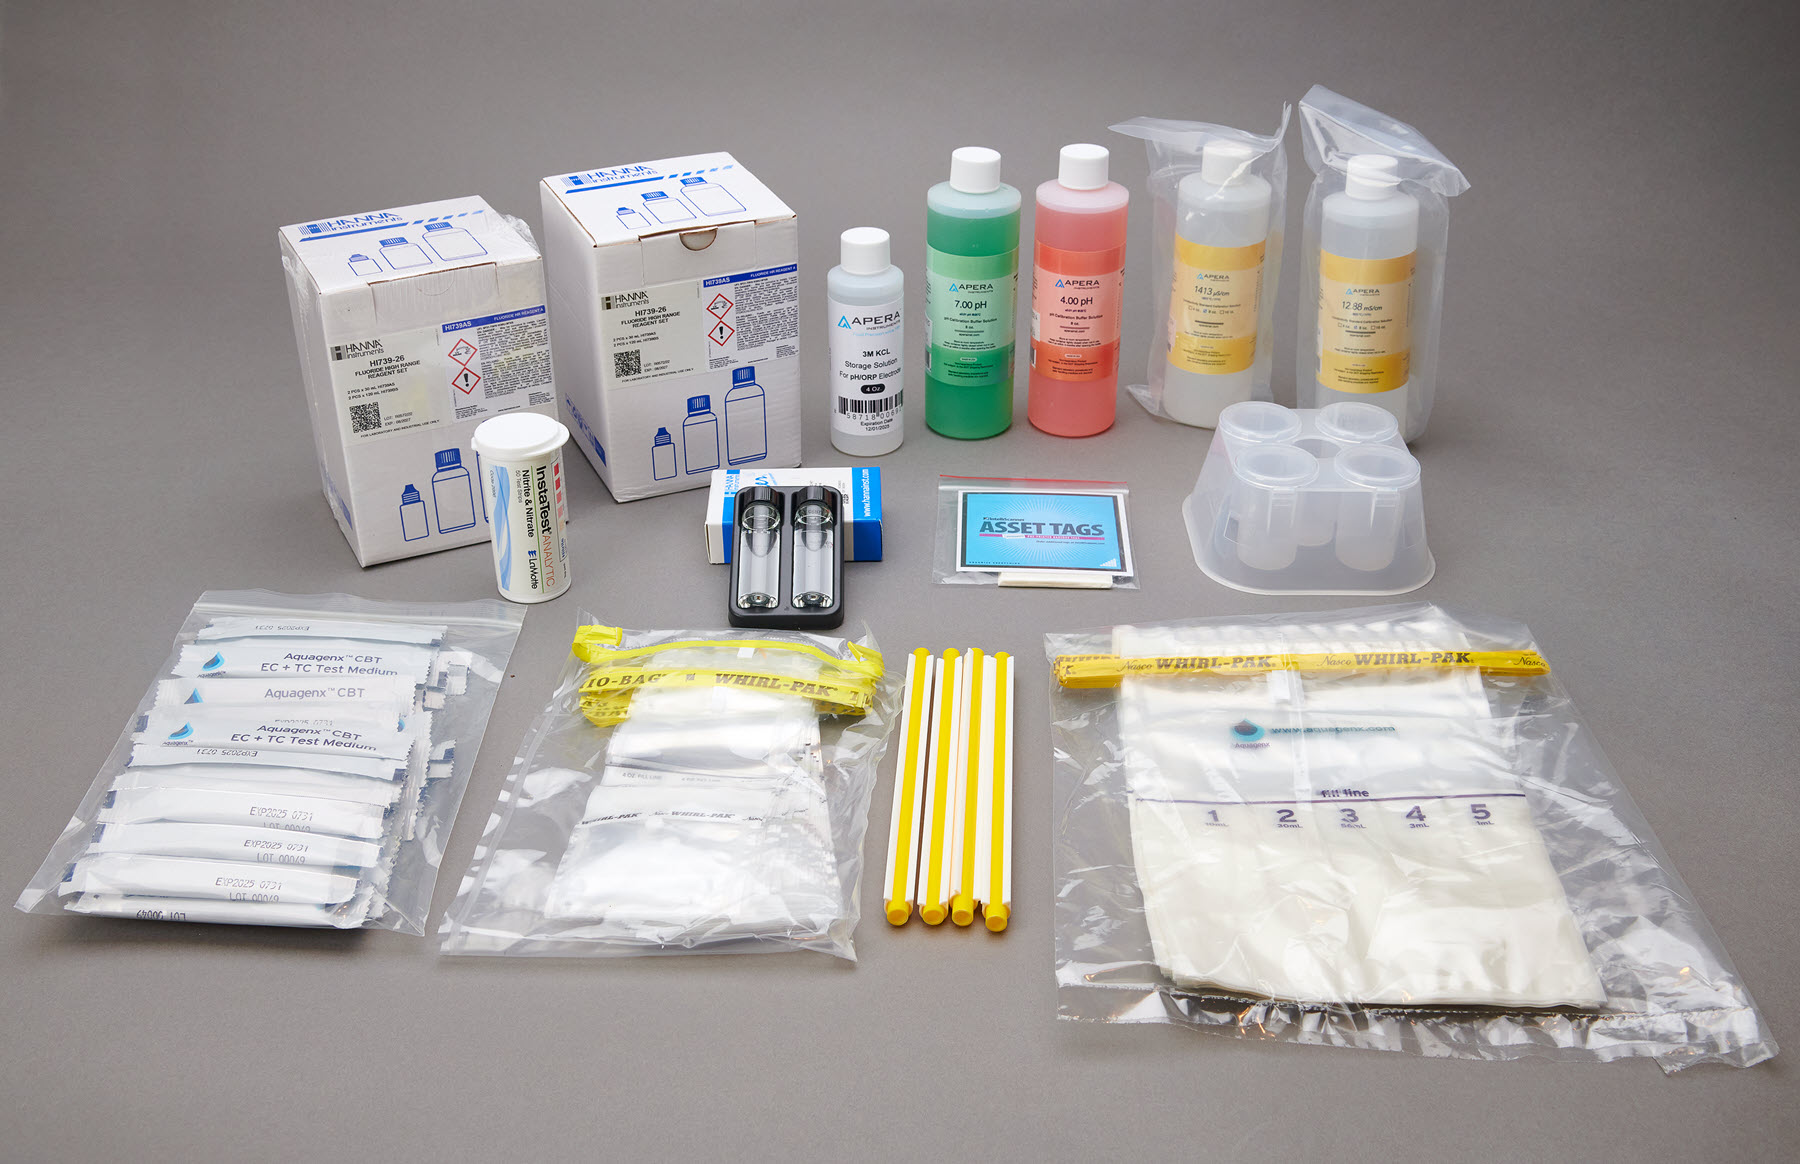 Tests and supplies included in Aquagenx Core CBT Refill Kit